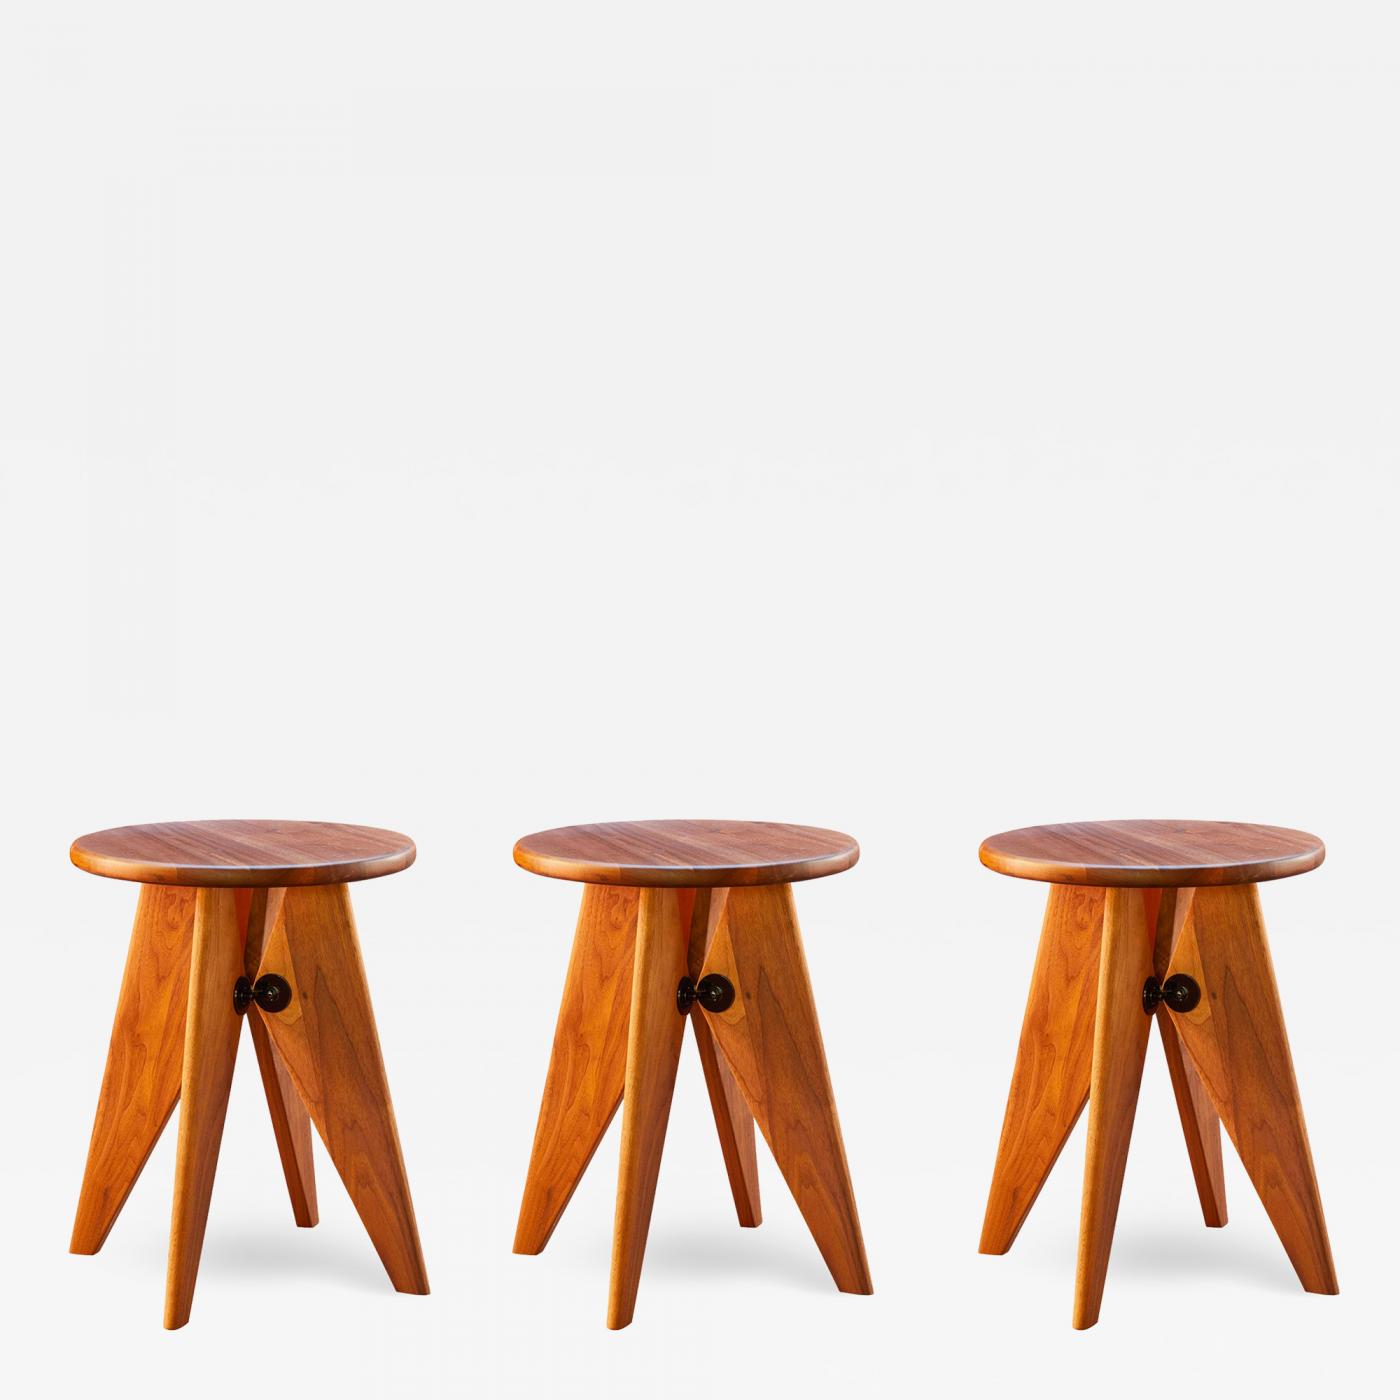 Vitra - Set of 3 Jean Prouvé Tabouret Solvay Stools in American Walnut